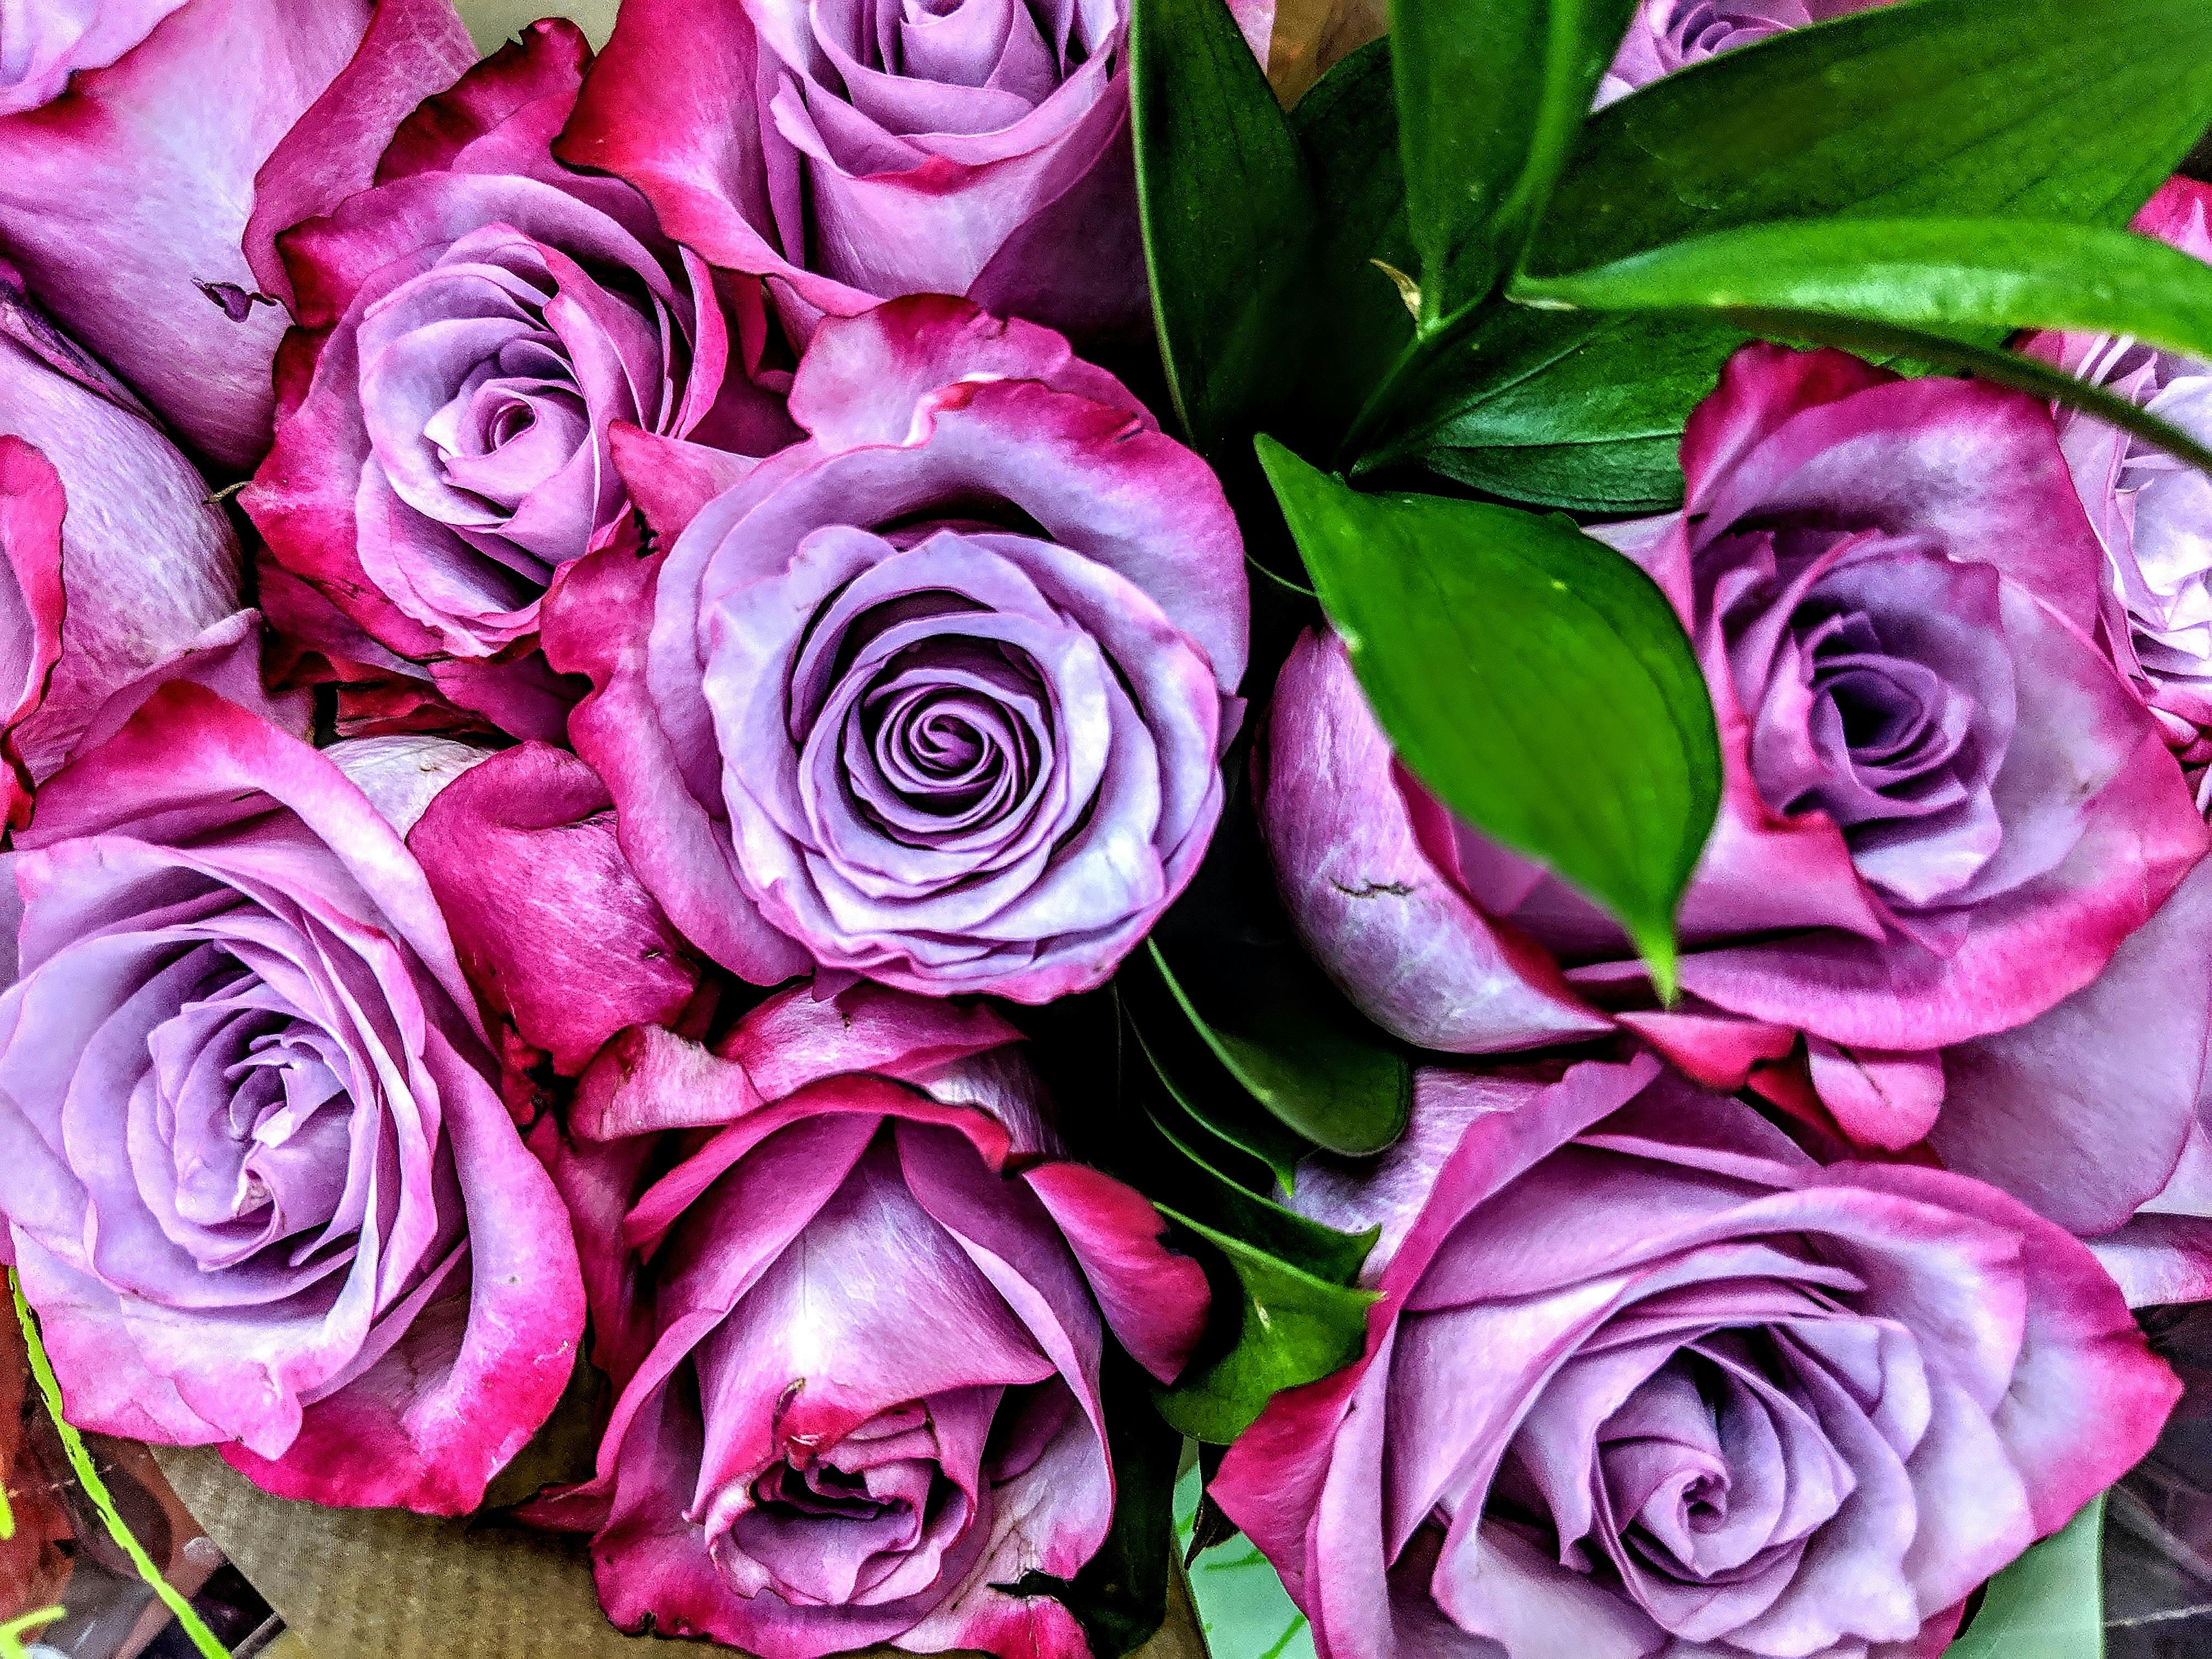 Free stock photo of pink roses, purple flowers, purple pink roses